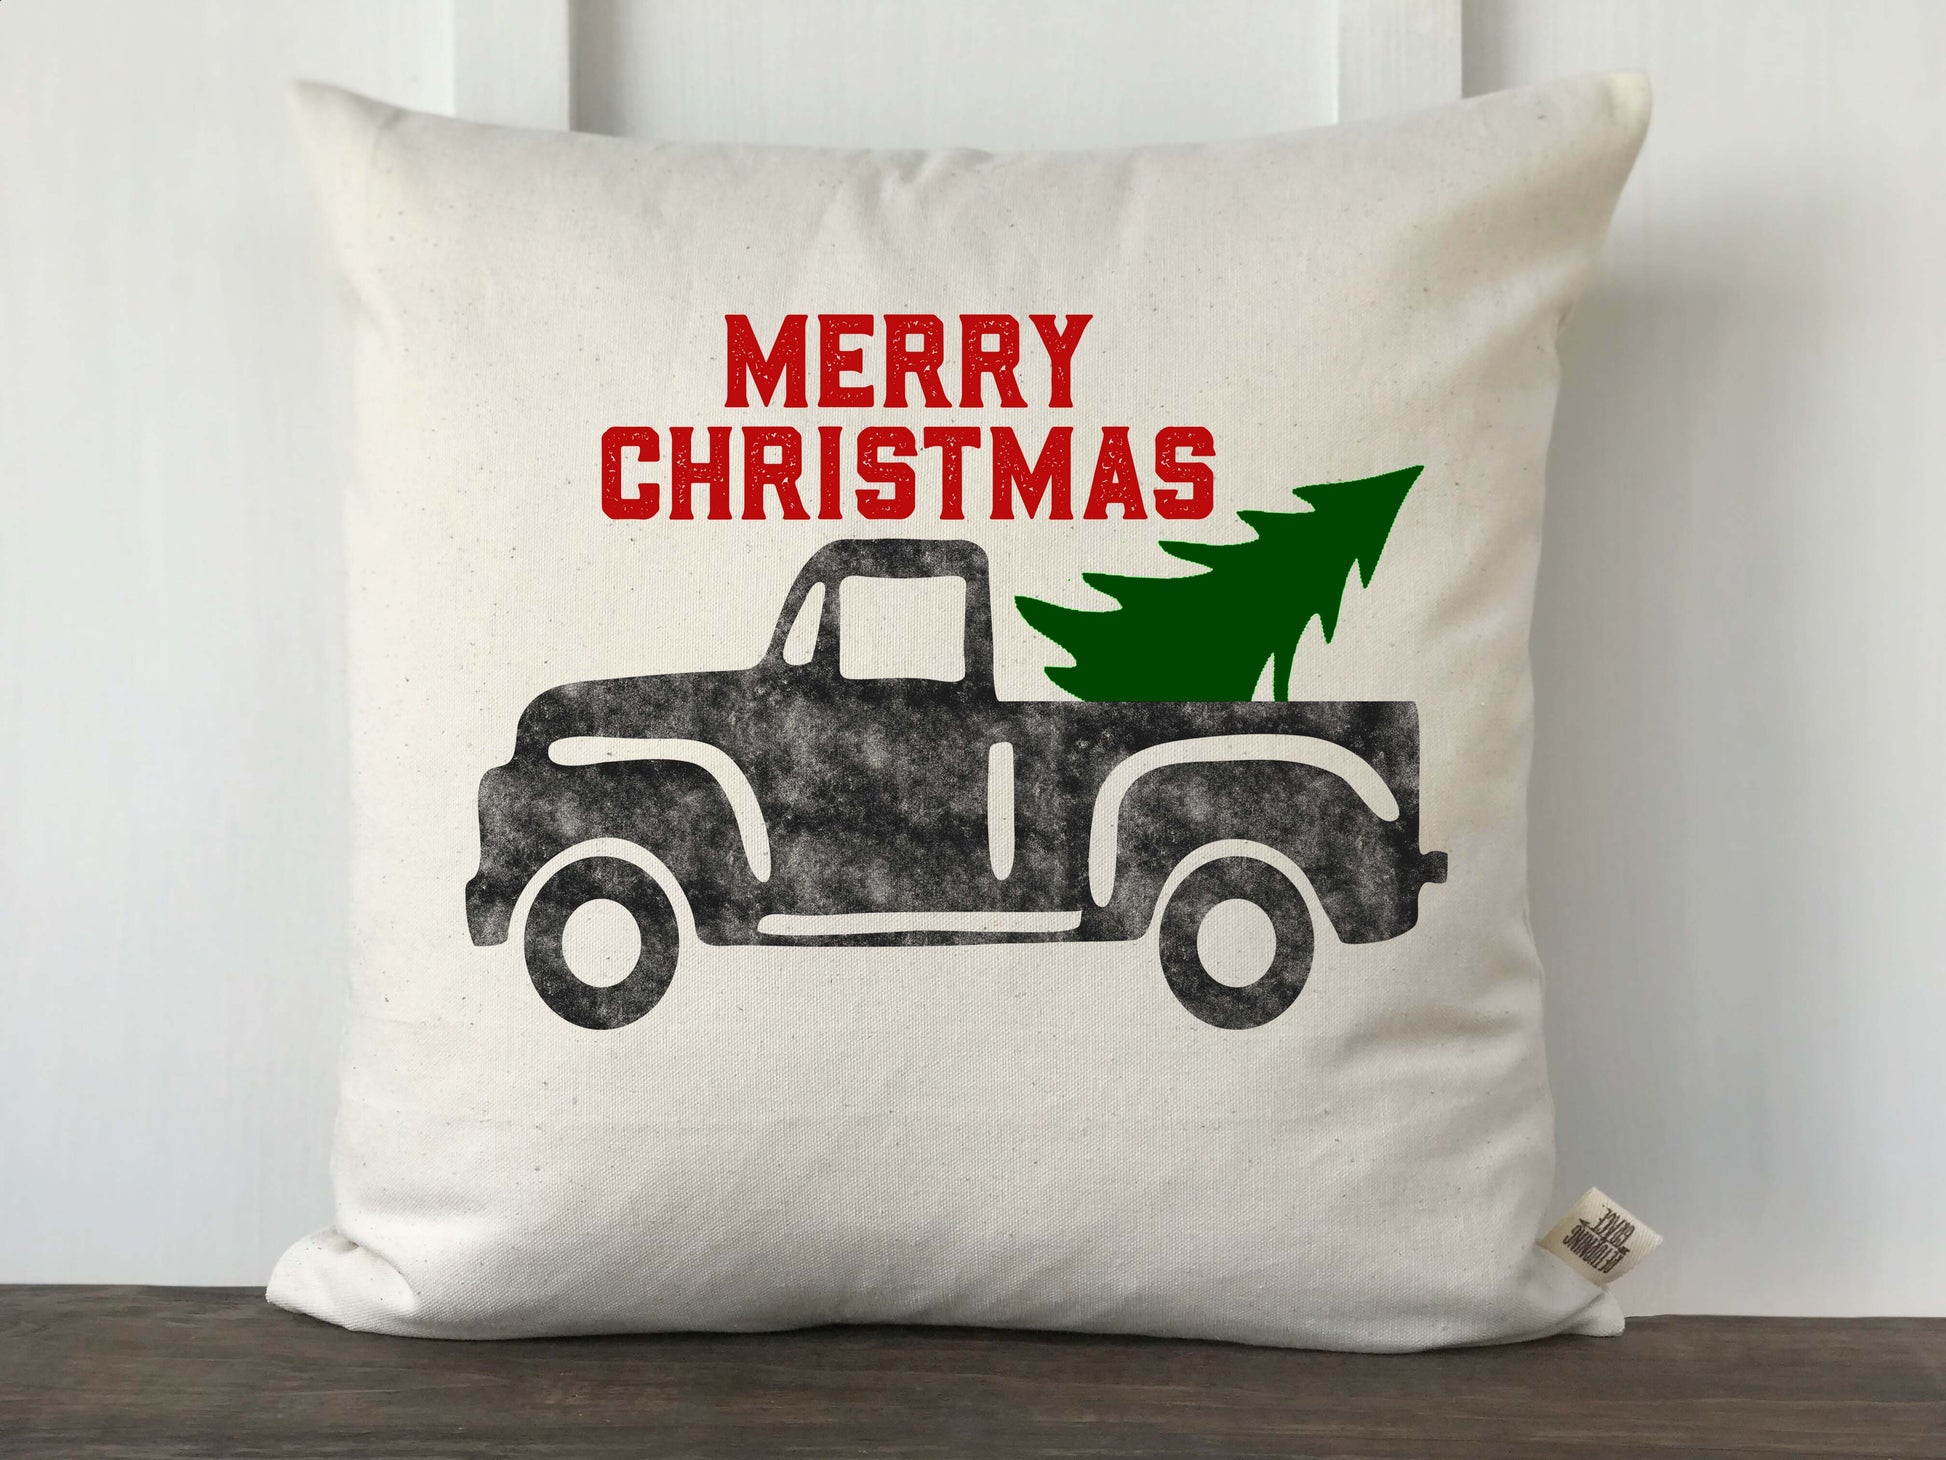 Merry Christmas Vintage Truck Pillow Cover - Returning Grace Designs